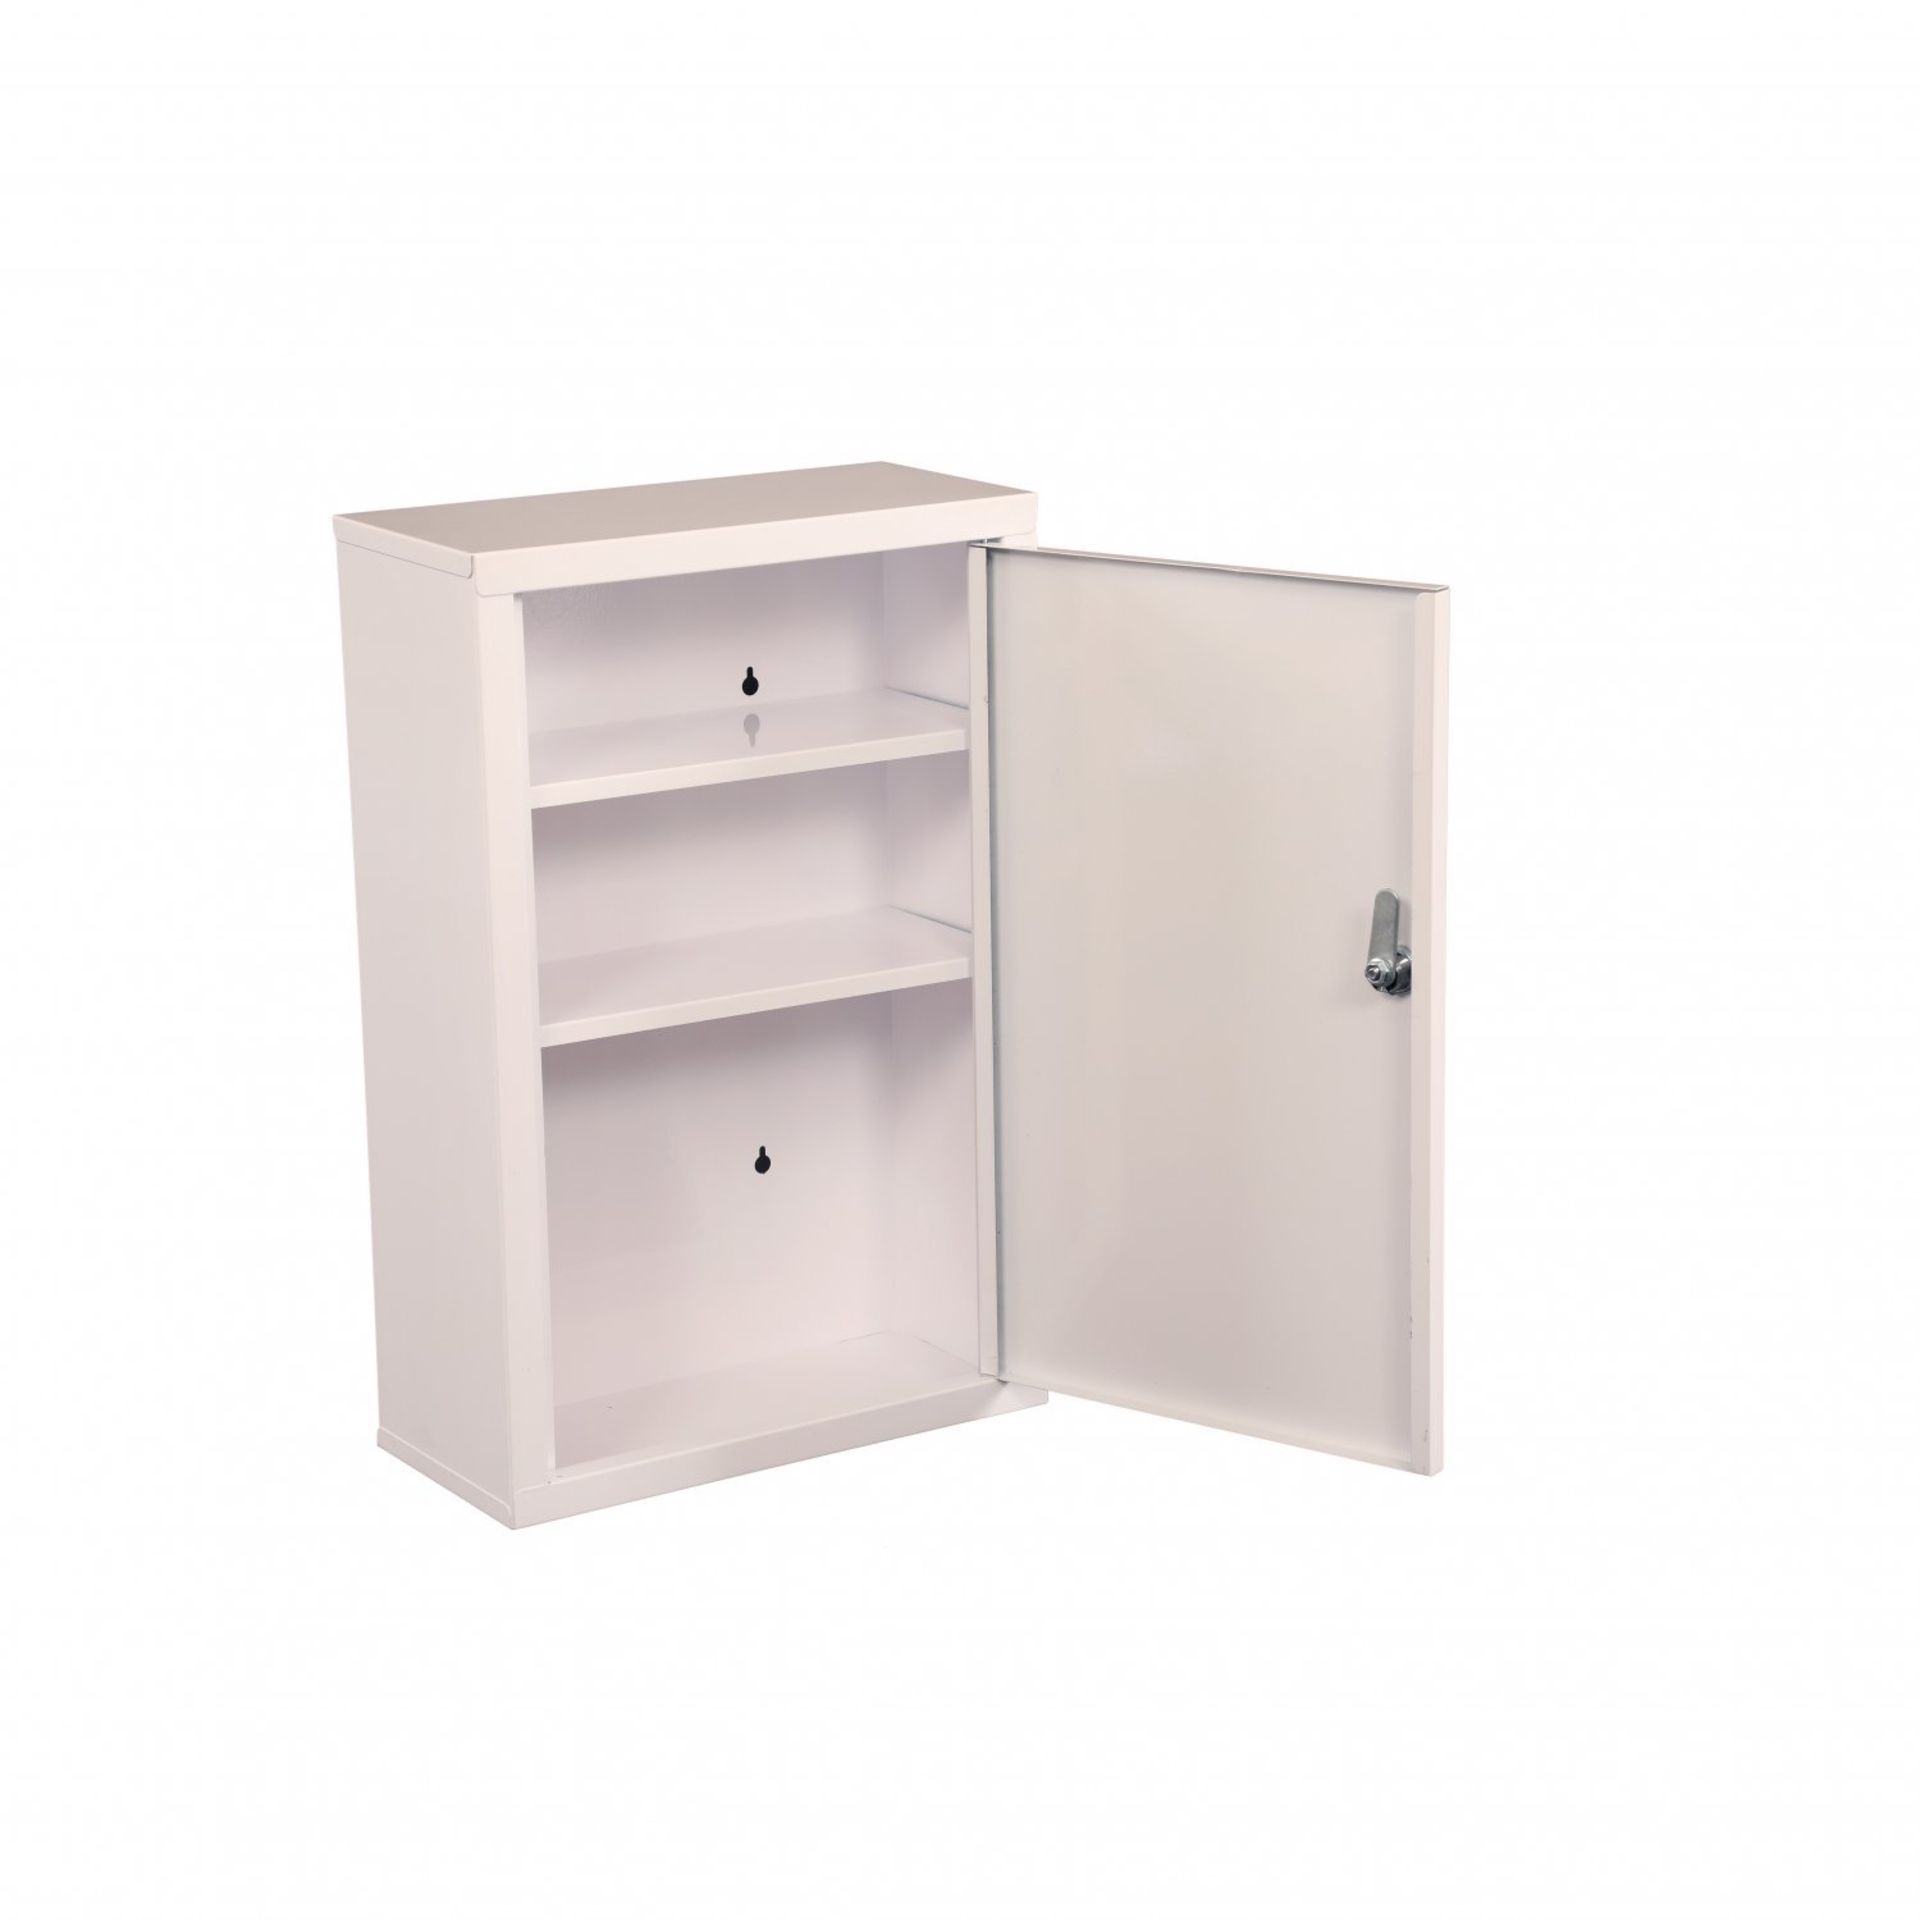 (PR96) Wall Mounted Metal First Aid Medicine Medical Cabinet Locker Dimensions: 48 x 32 x 16cm... - Image 2 of 2